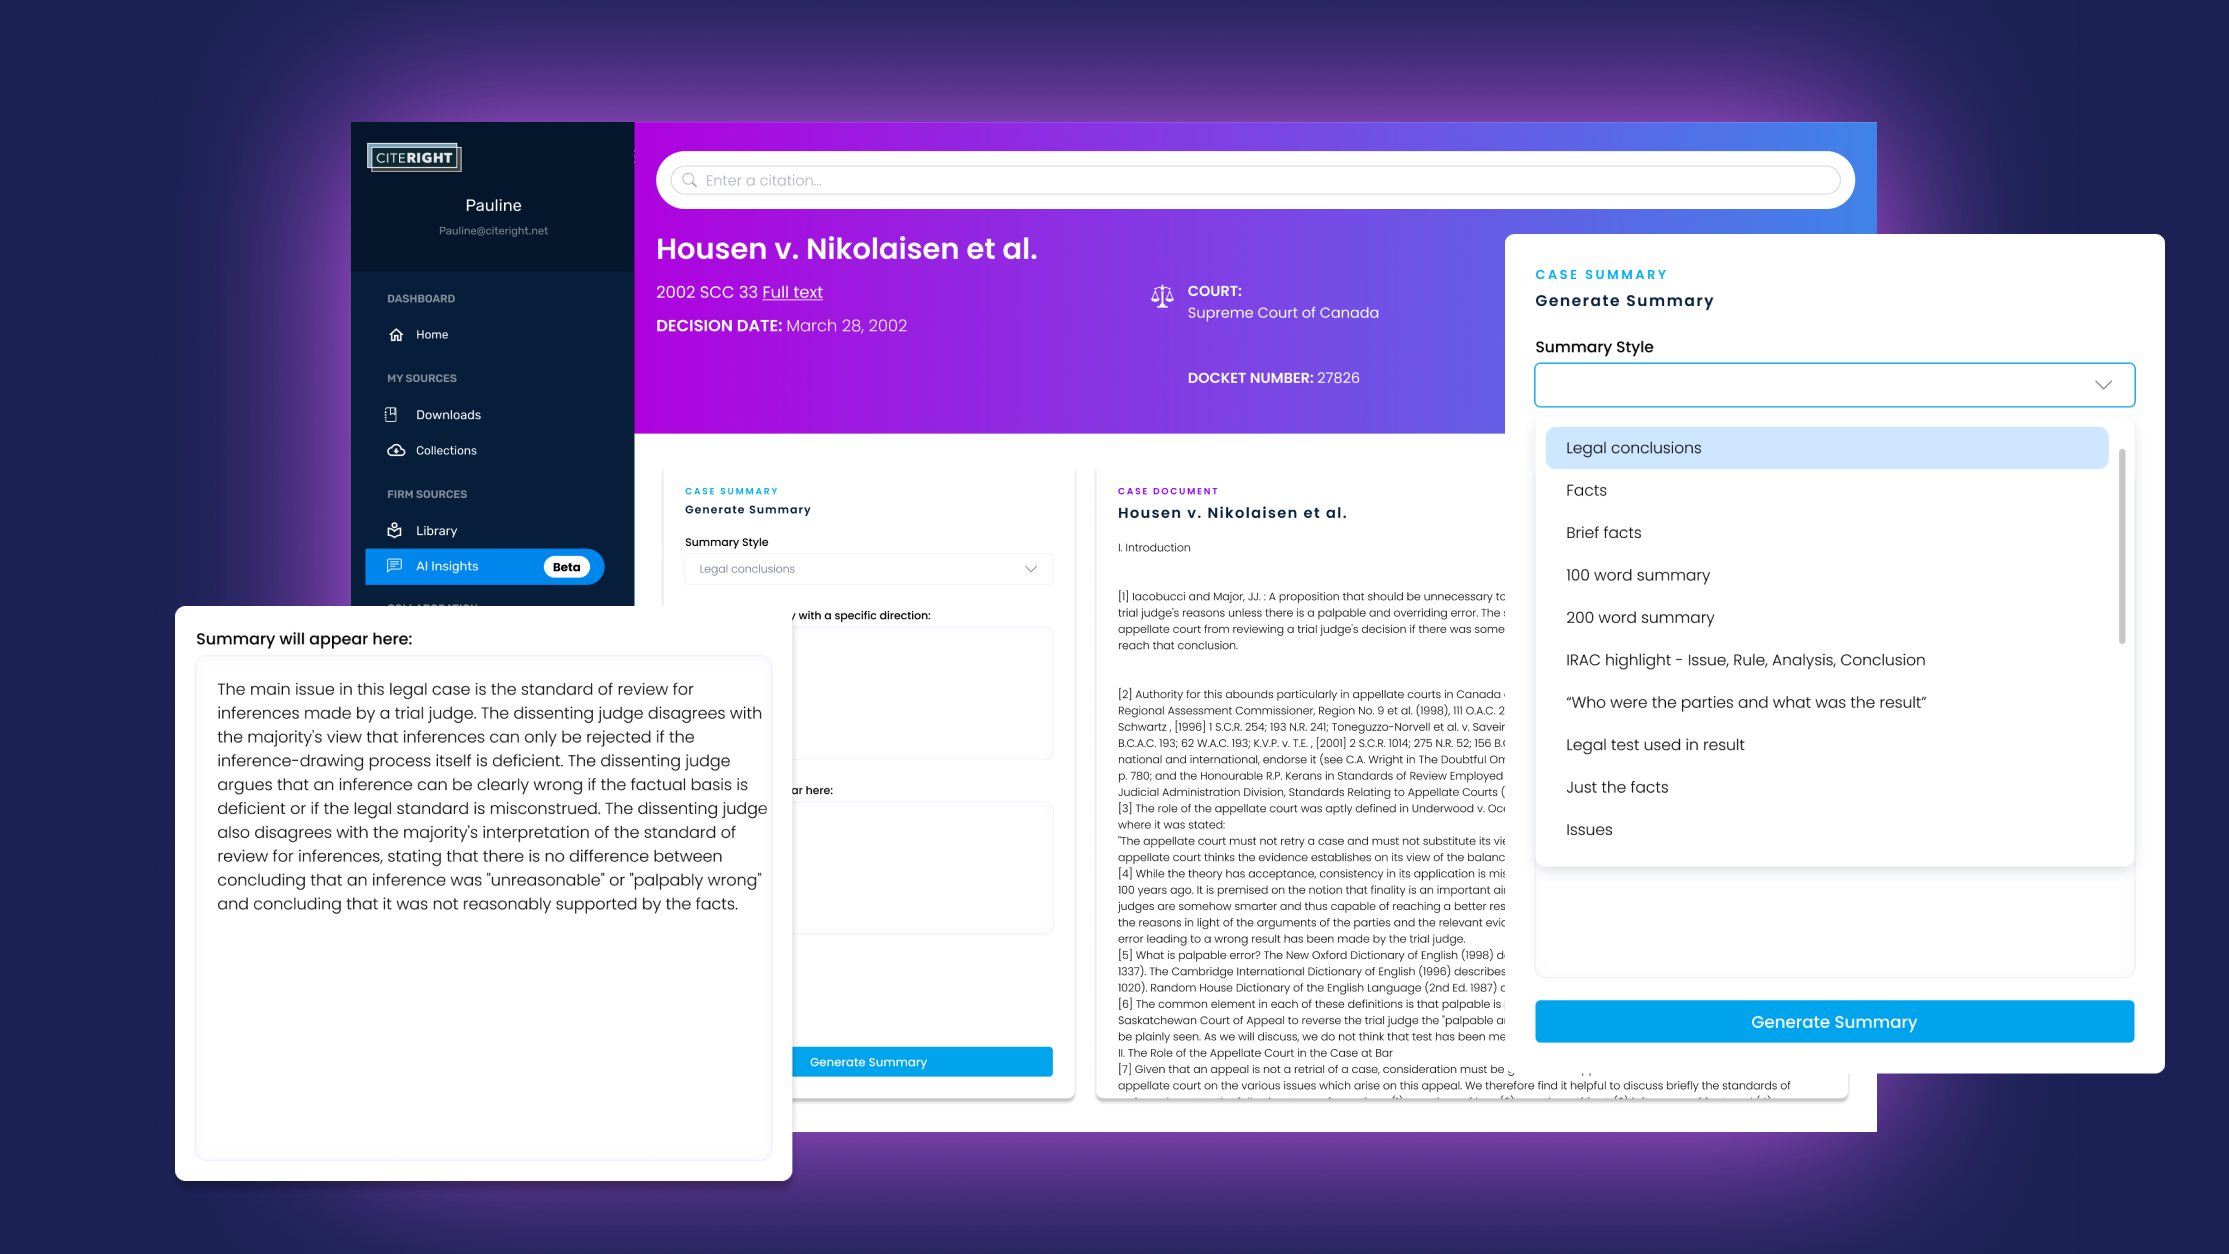 Building On Its Jurisage Merger, CiteRight Launches AI-Powered Tool For Litigators to Summarize and Synthesize Case Law